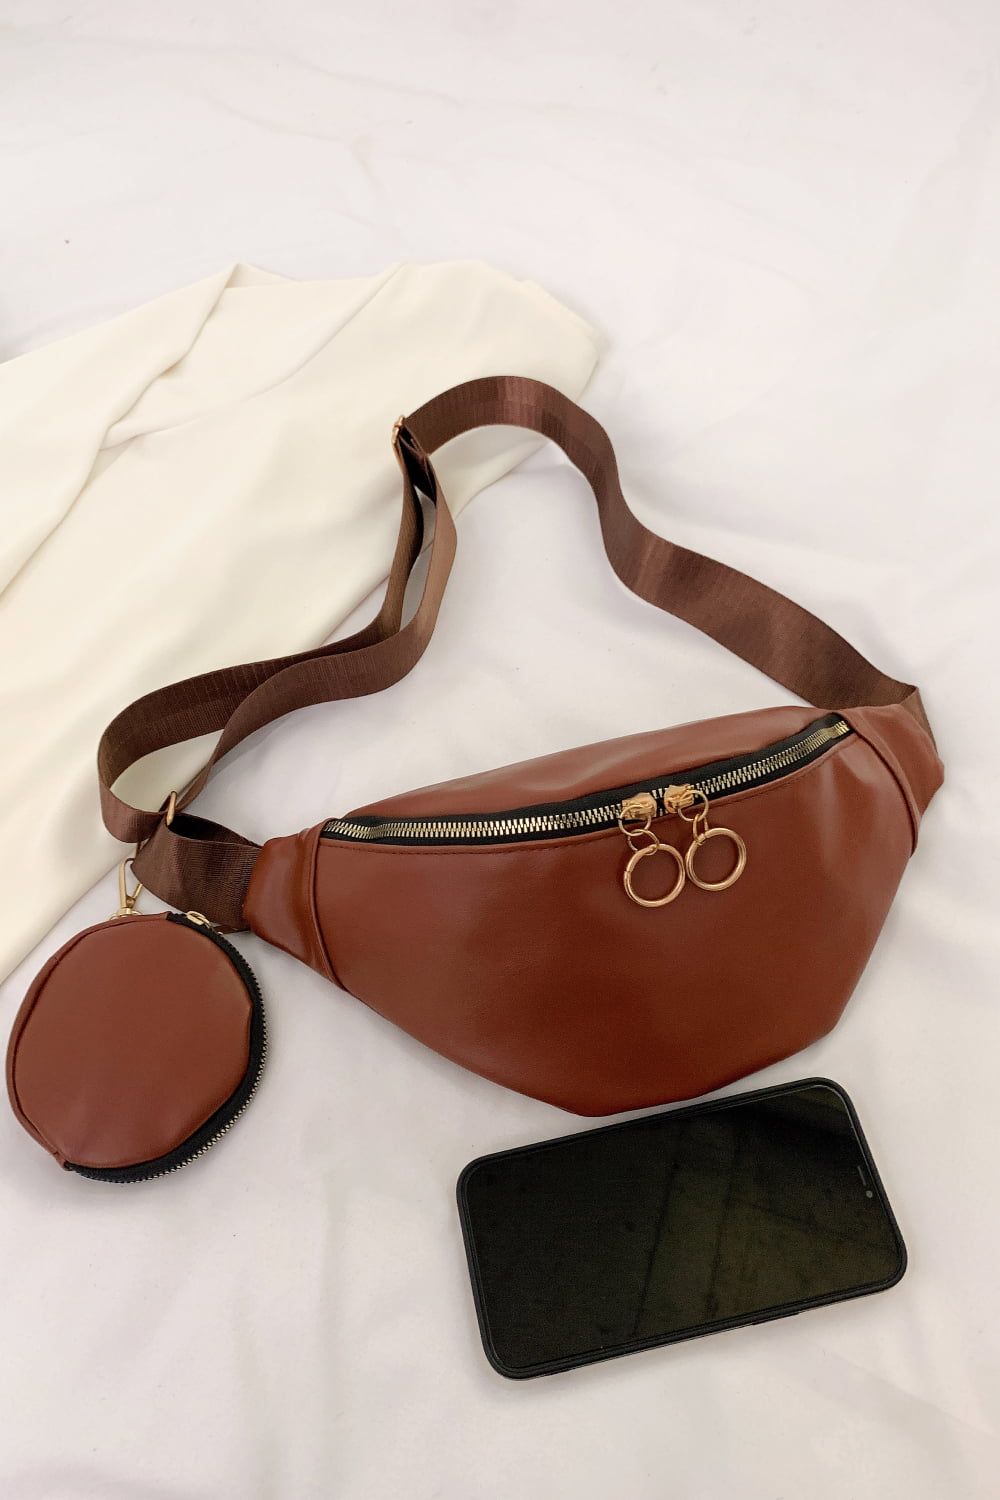 PU Leather Sling Bag with Small Purse.